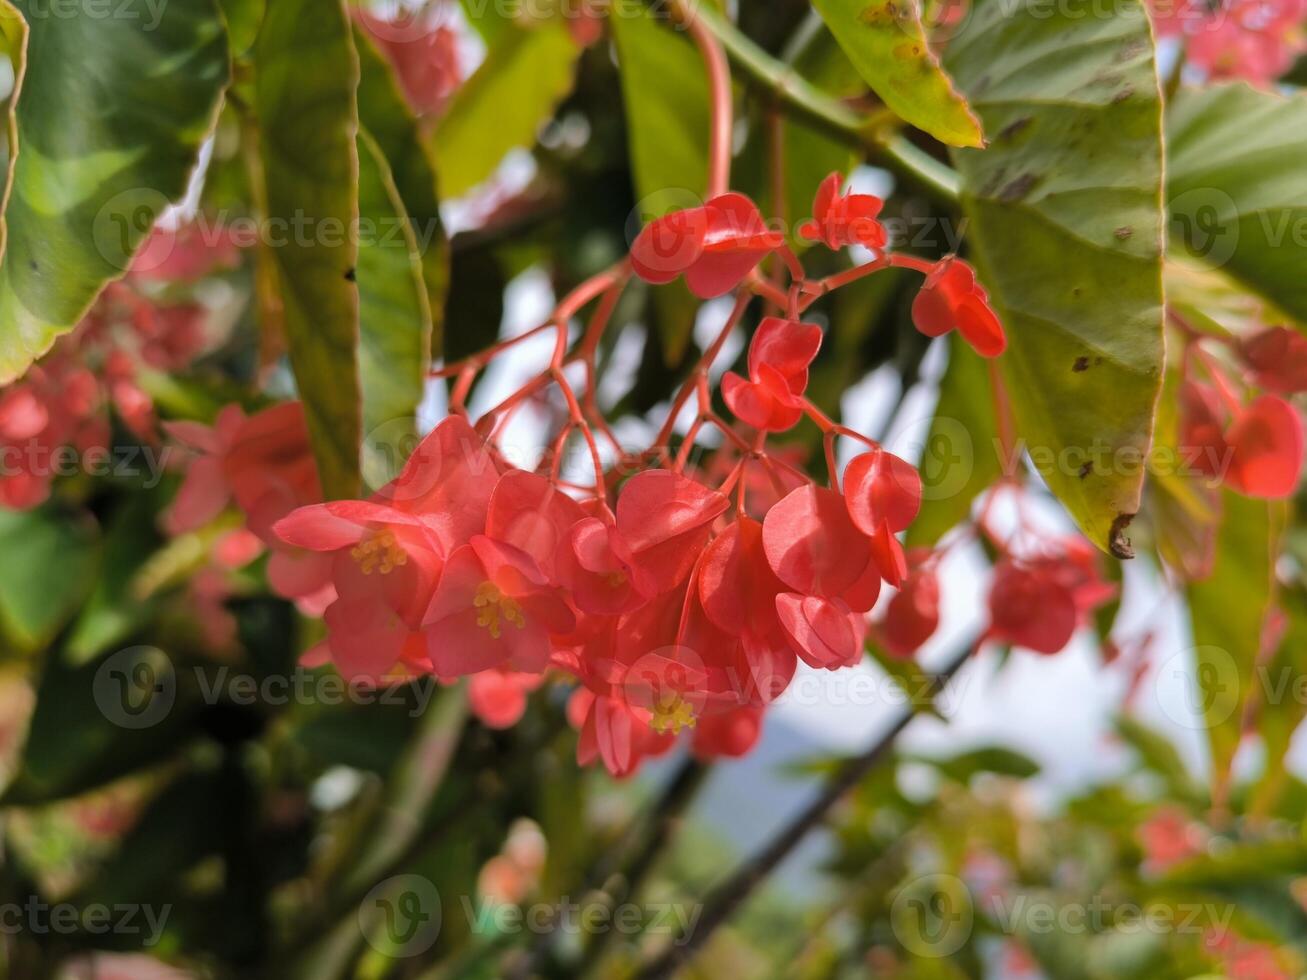 Red Flamboyant or Red Begonia flowers are blooming in the garden photo